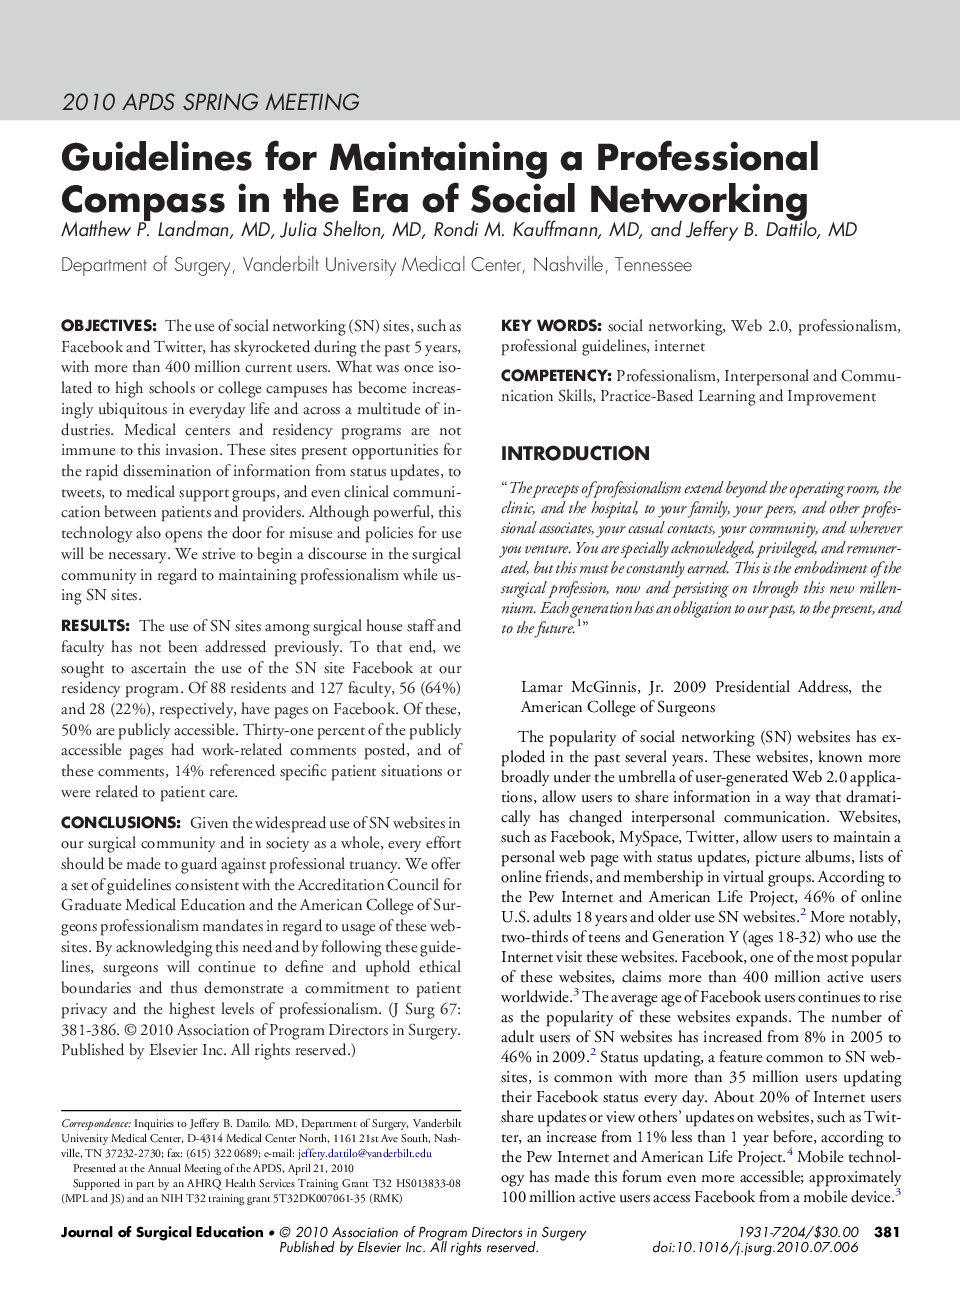 Guidelines for Maintaining a Professional Compass in the Era of Social Networking 